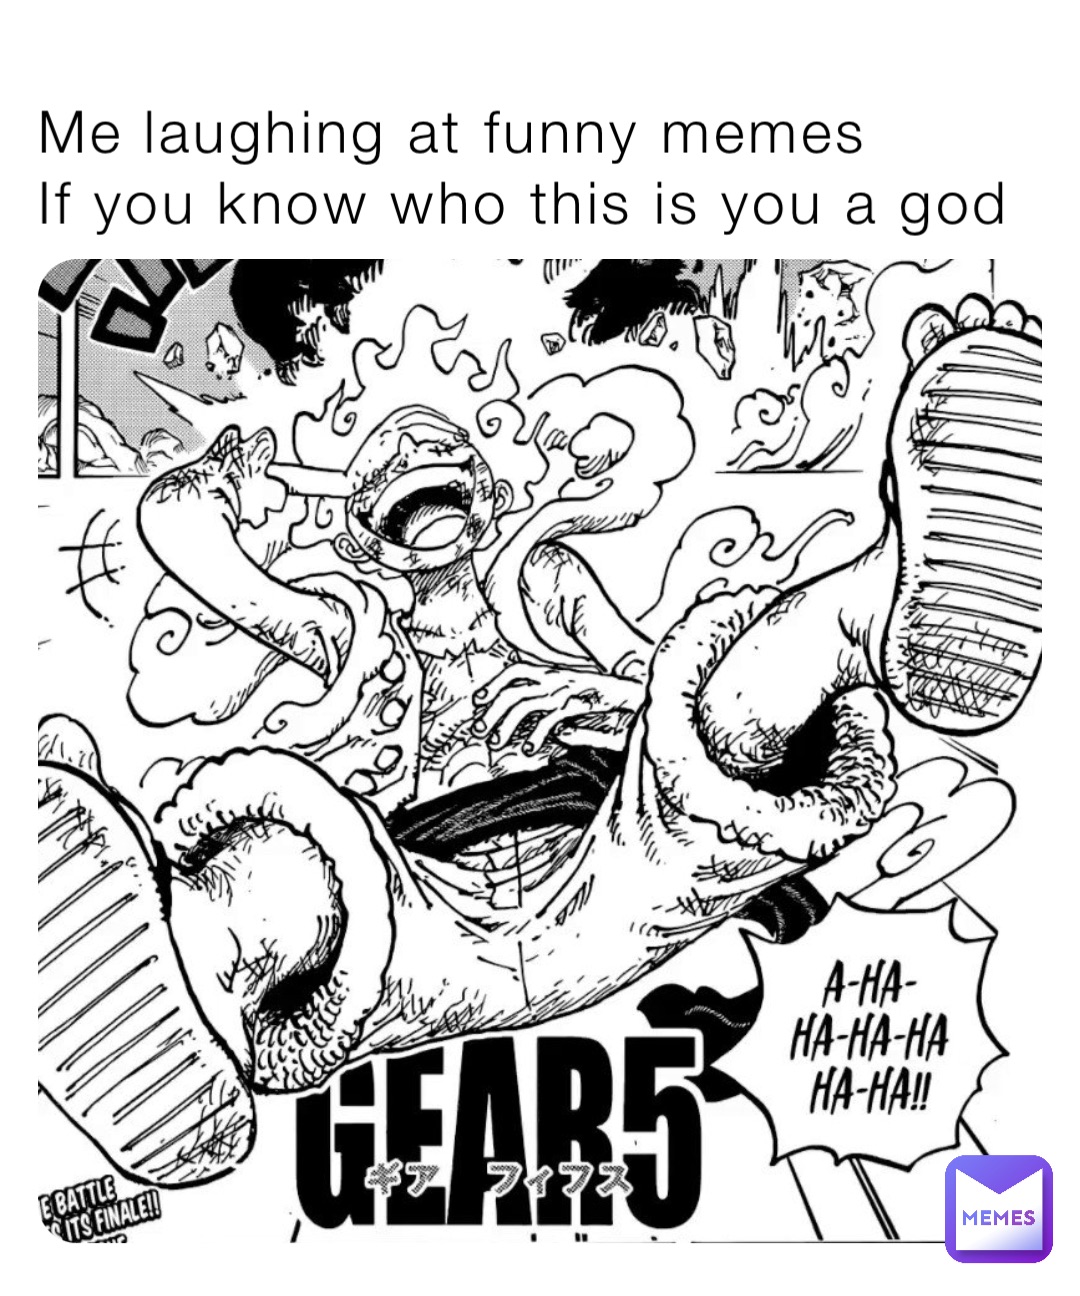 Me laughing at funny memes 
If you know who this is you a god